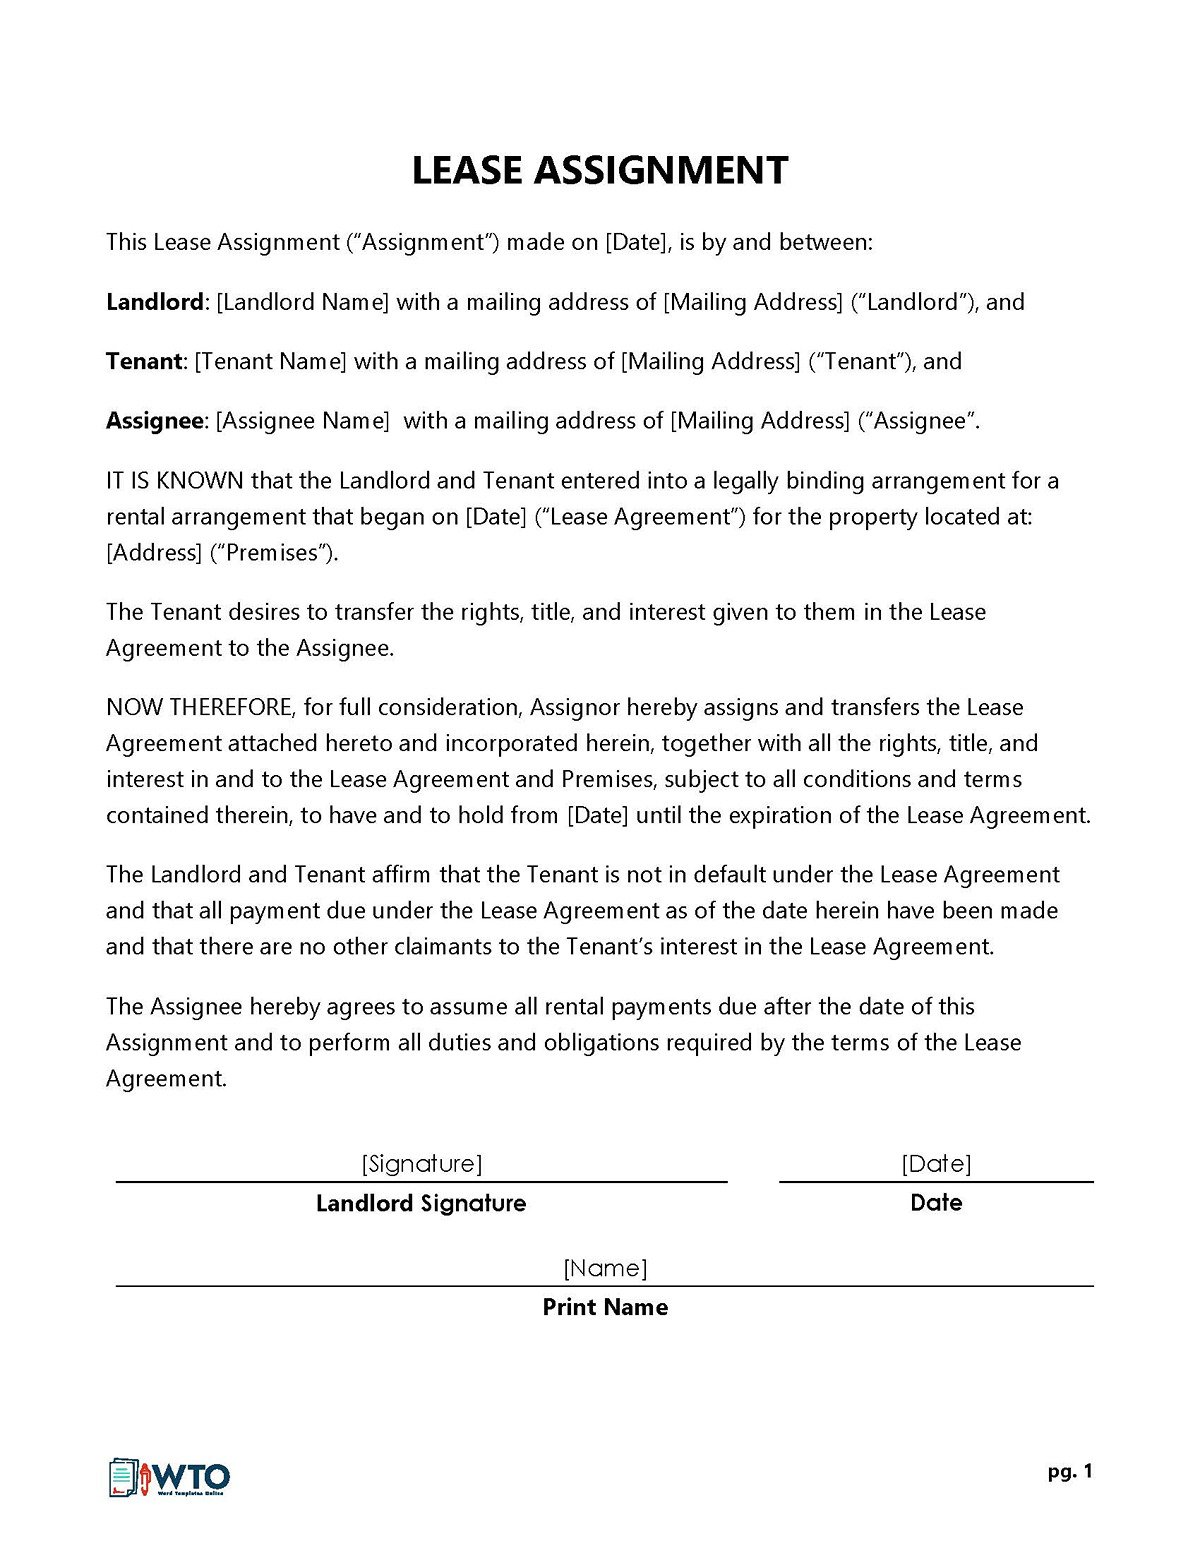 Free Editable Lease Assignment Agreement Form 01 as Word File